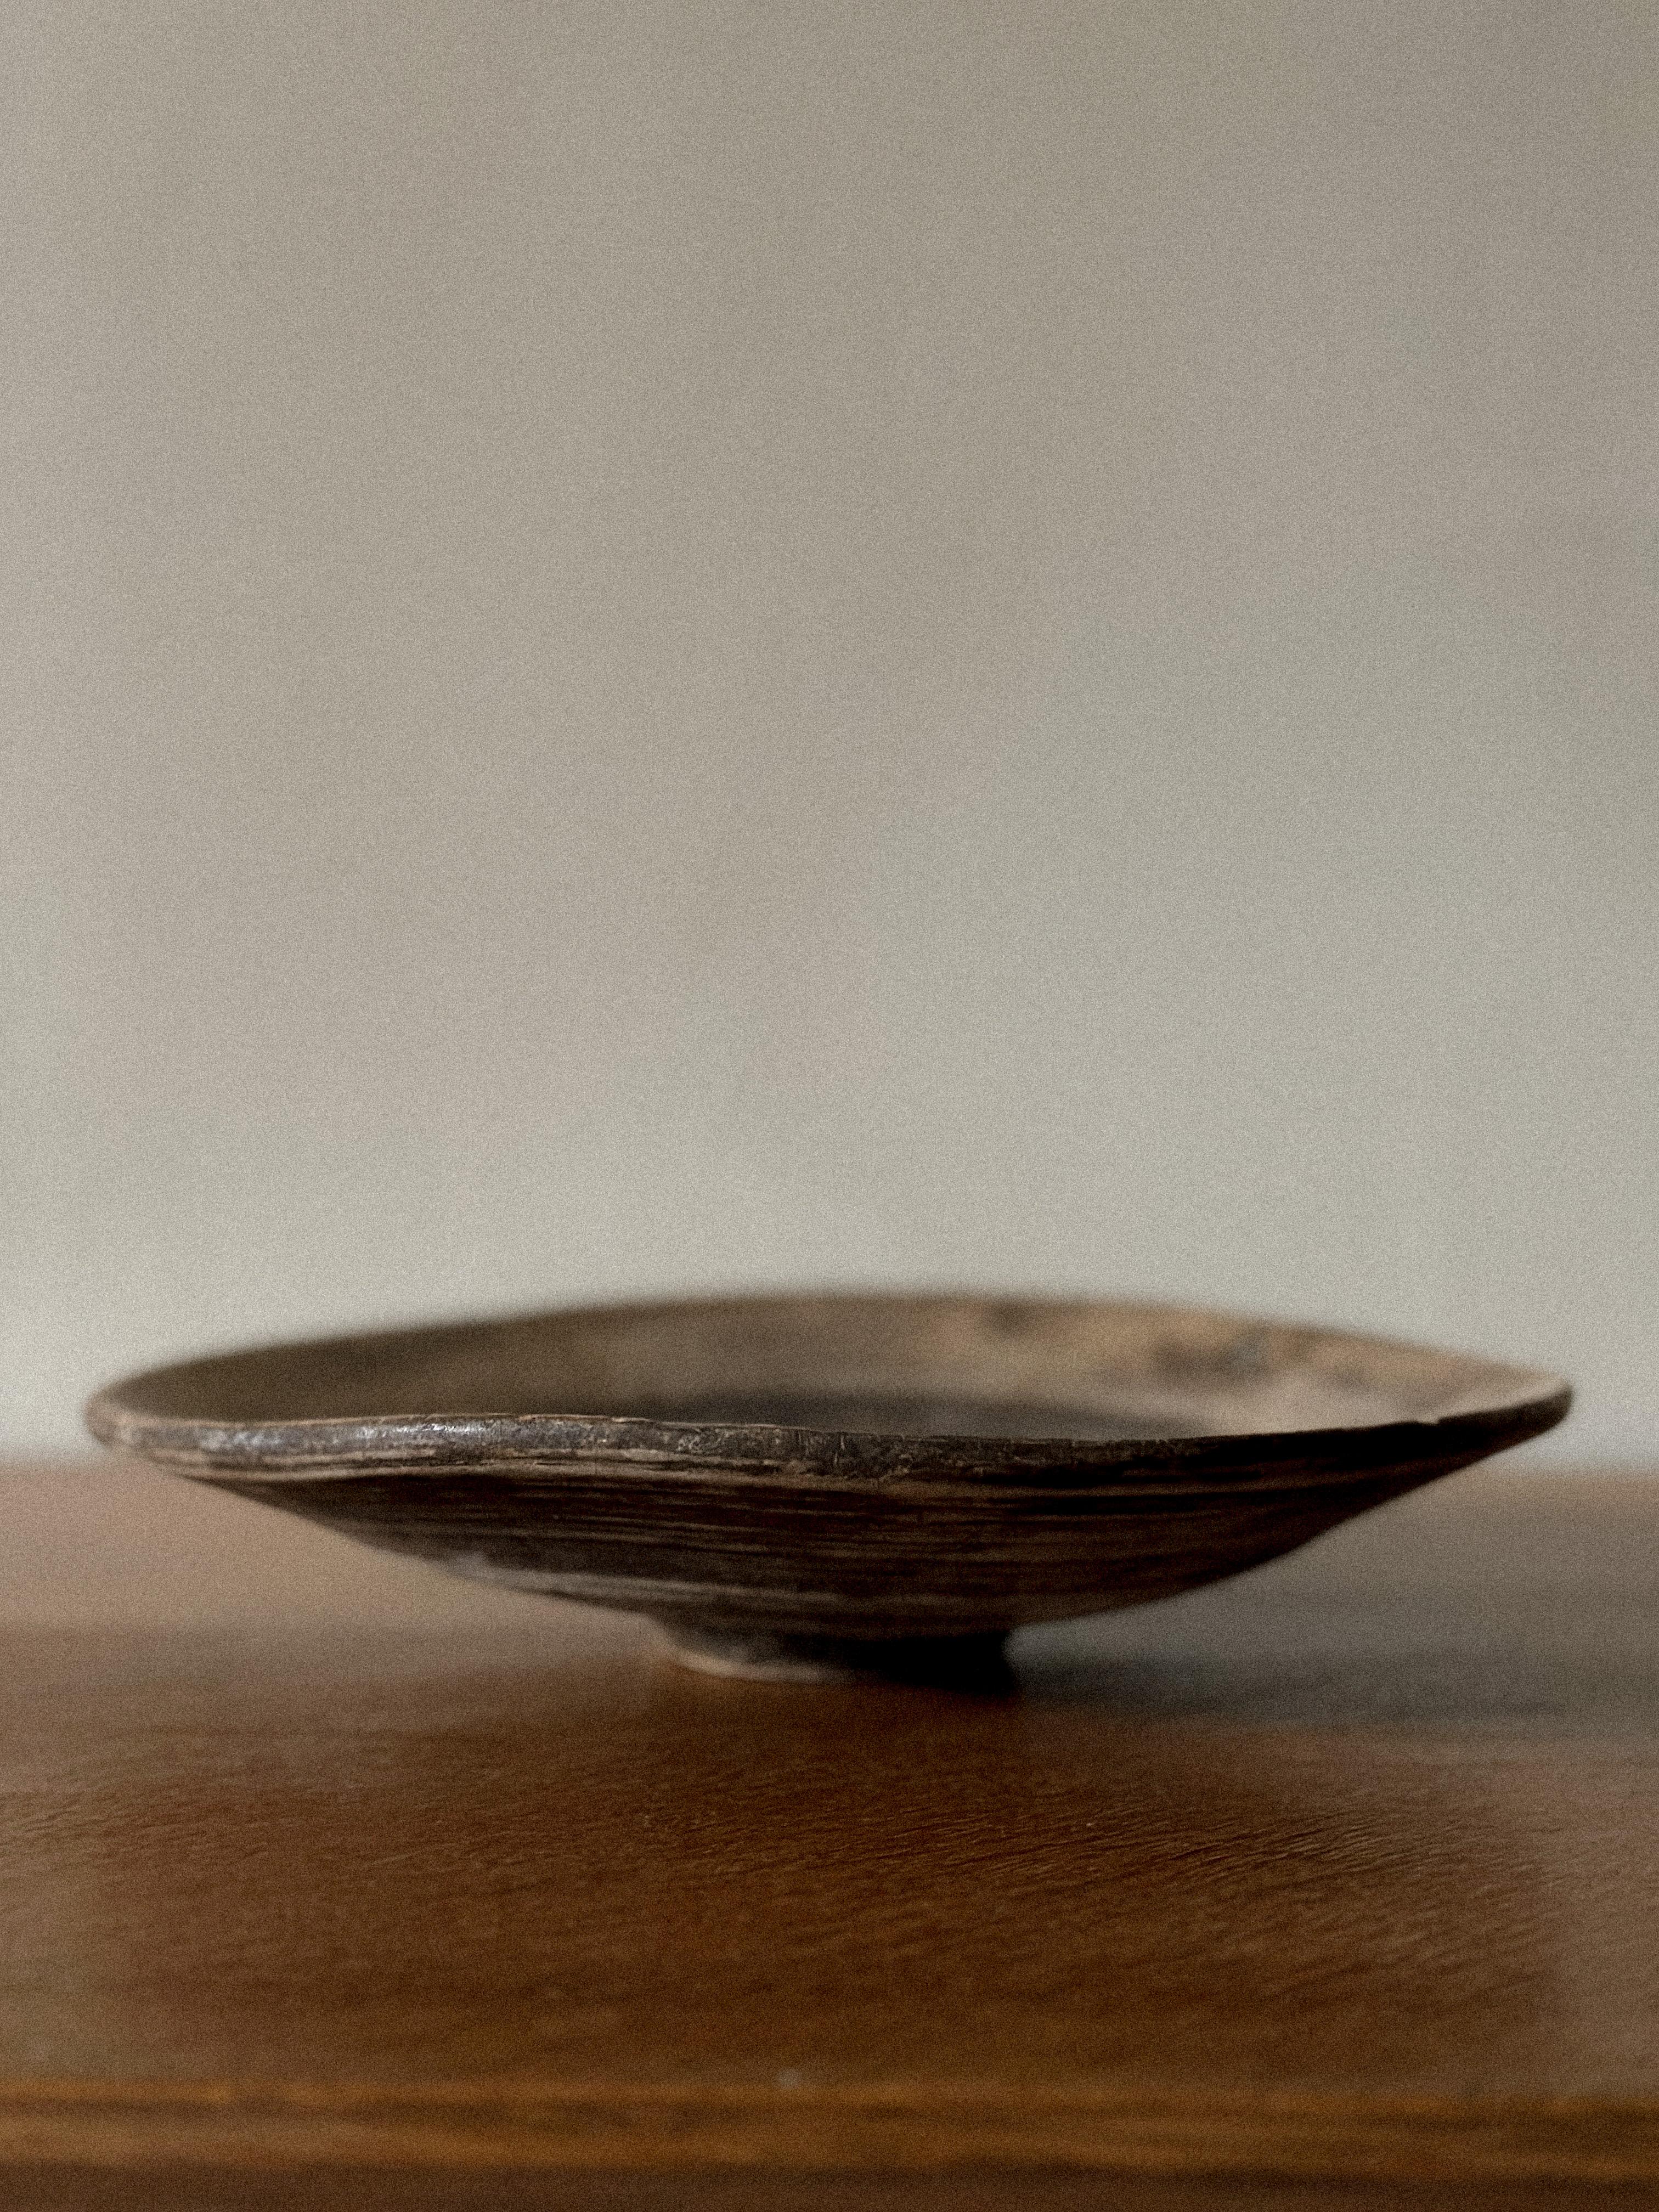 A wonderful wooden wabi sabi plate from Scandinavia, circa 1800s. In good vintage condition showing beautiful patina from age and use.

Measures: 
Ø: 26 cm, H: 5 cm
